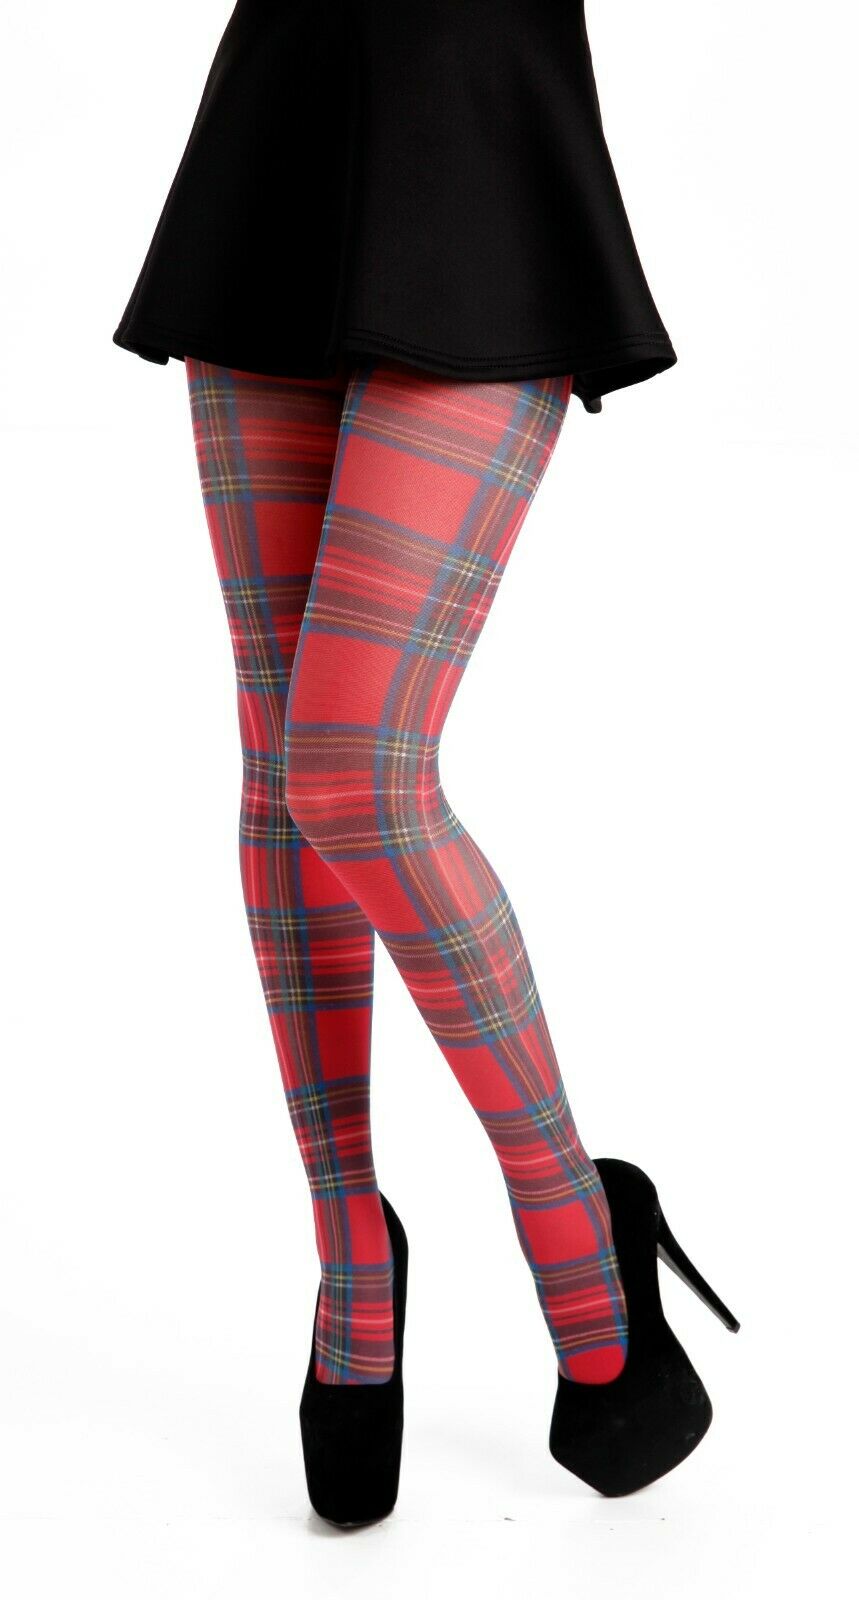 Scottish Tartan / Argyle Print Tights Available In 2 Styles (Made In Italy)